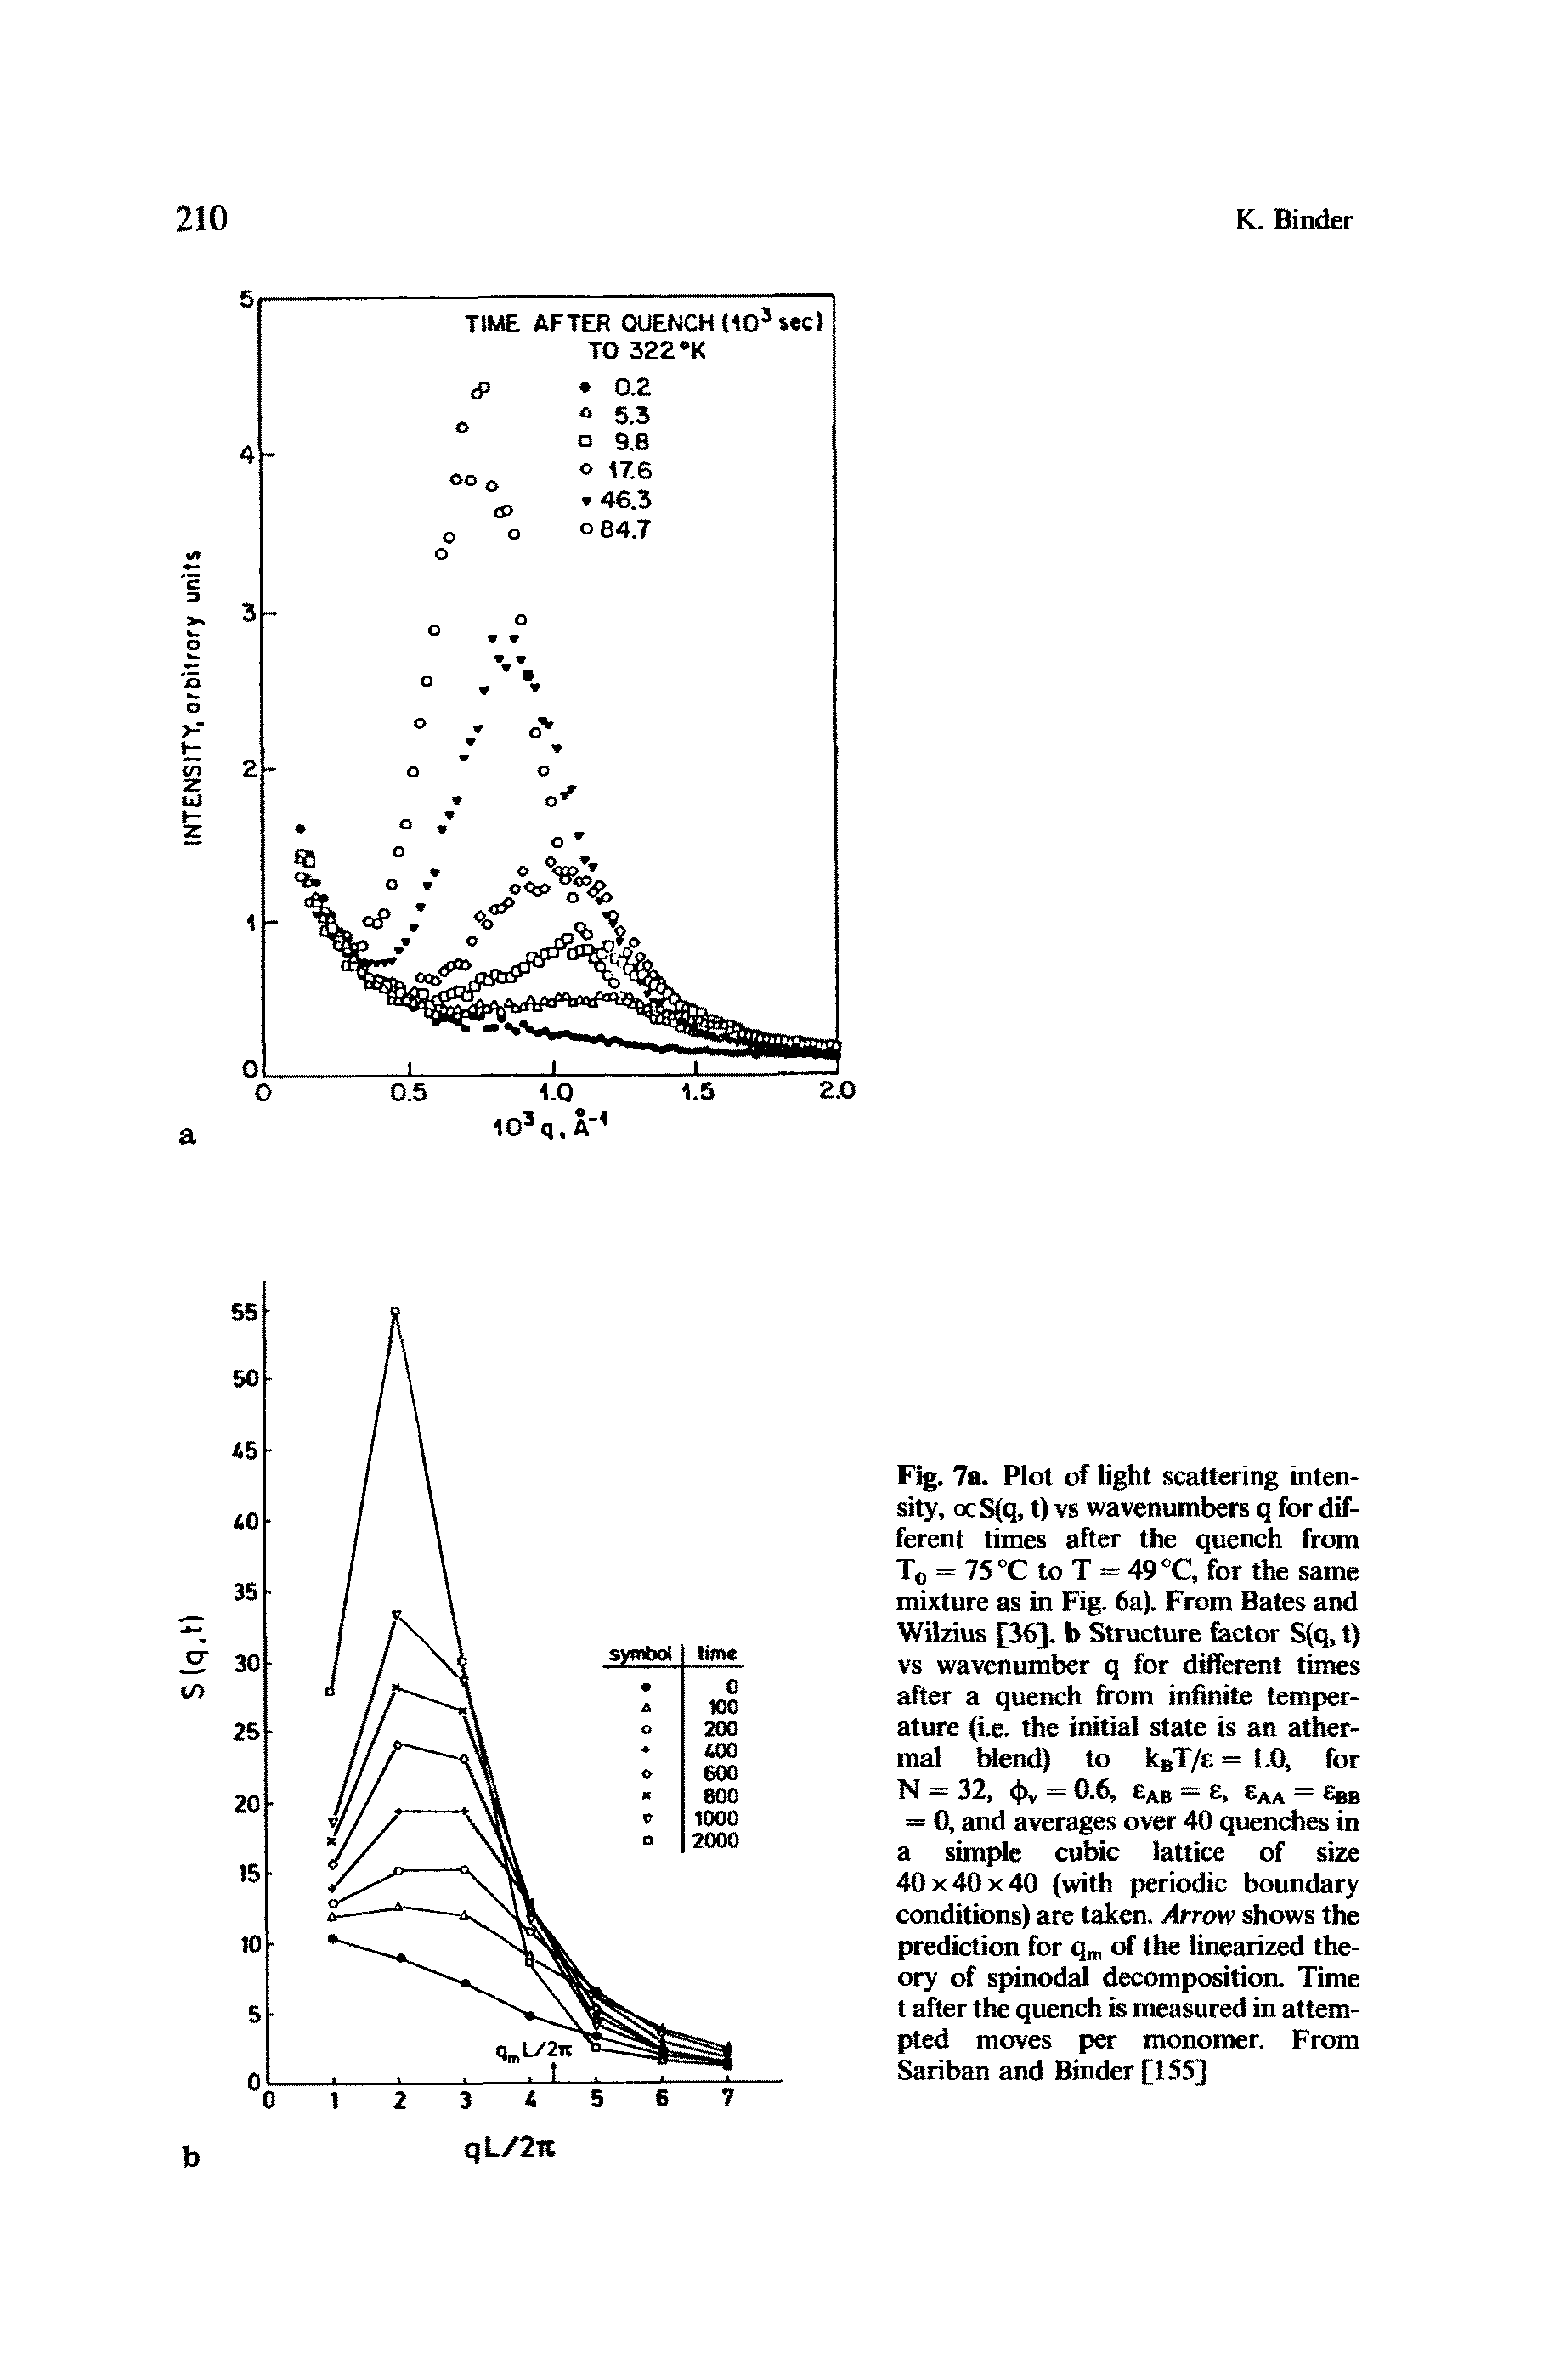 Fig. 7a. Plot of light scattering intensity, ocS(q, t) vs wavenumbers q for different times after the quench from To = 75 °C to T — 49 °C, for the same mixture as in Fig. 6a). From Bates and Wilzius [36], b Structure factor S(q, t) vs wavenumber q for different times after a quench from infinite temperature (i.e. the Initial state is an ather-mal blend) to kBT/t = 1.0, for N = 32, <[>, = 0.6, eAB = e, eAA = cBB = 0, and averages over 40 quenches in a simple cubic lattice of size 40 x 40 x 40 (with periodic boundary conditions) are taken. Arrow shows the prediction for qm of the linearized theory of spinodal decomposition. Time t after the quench is measured in attempted moves per monomer. From Sariban and Binder [155]...